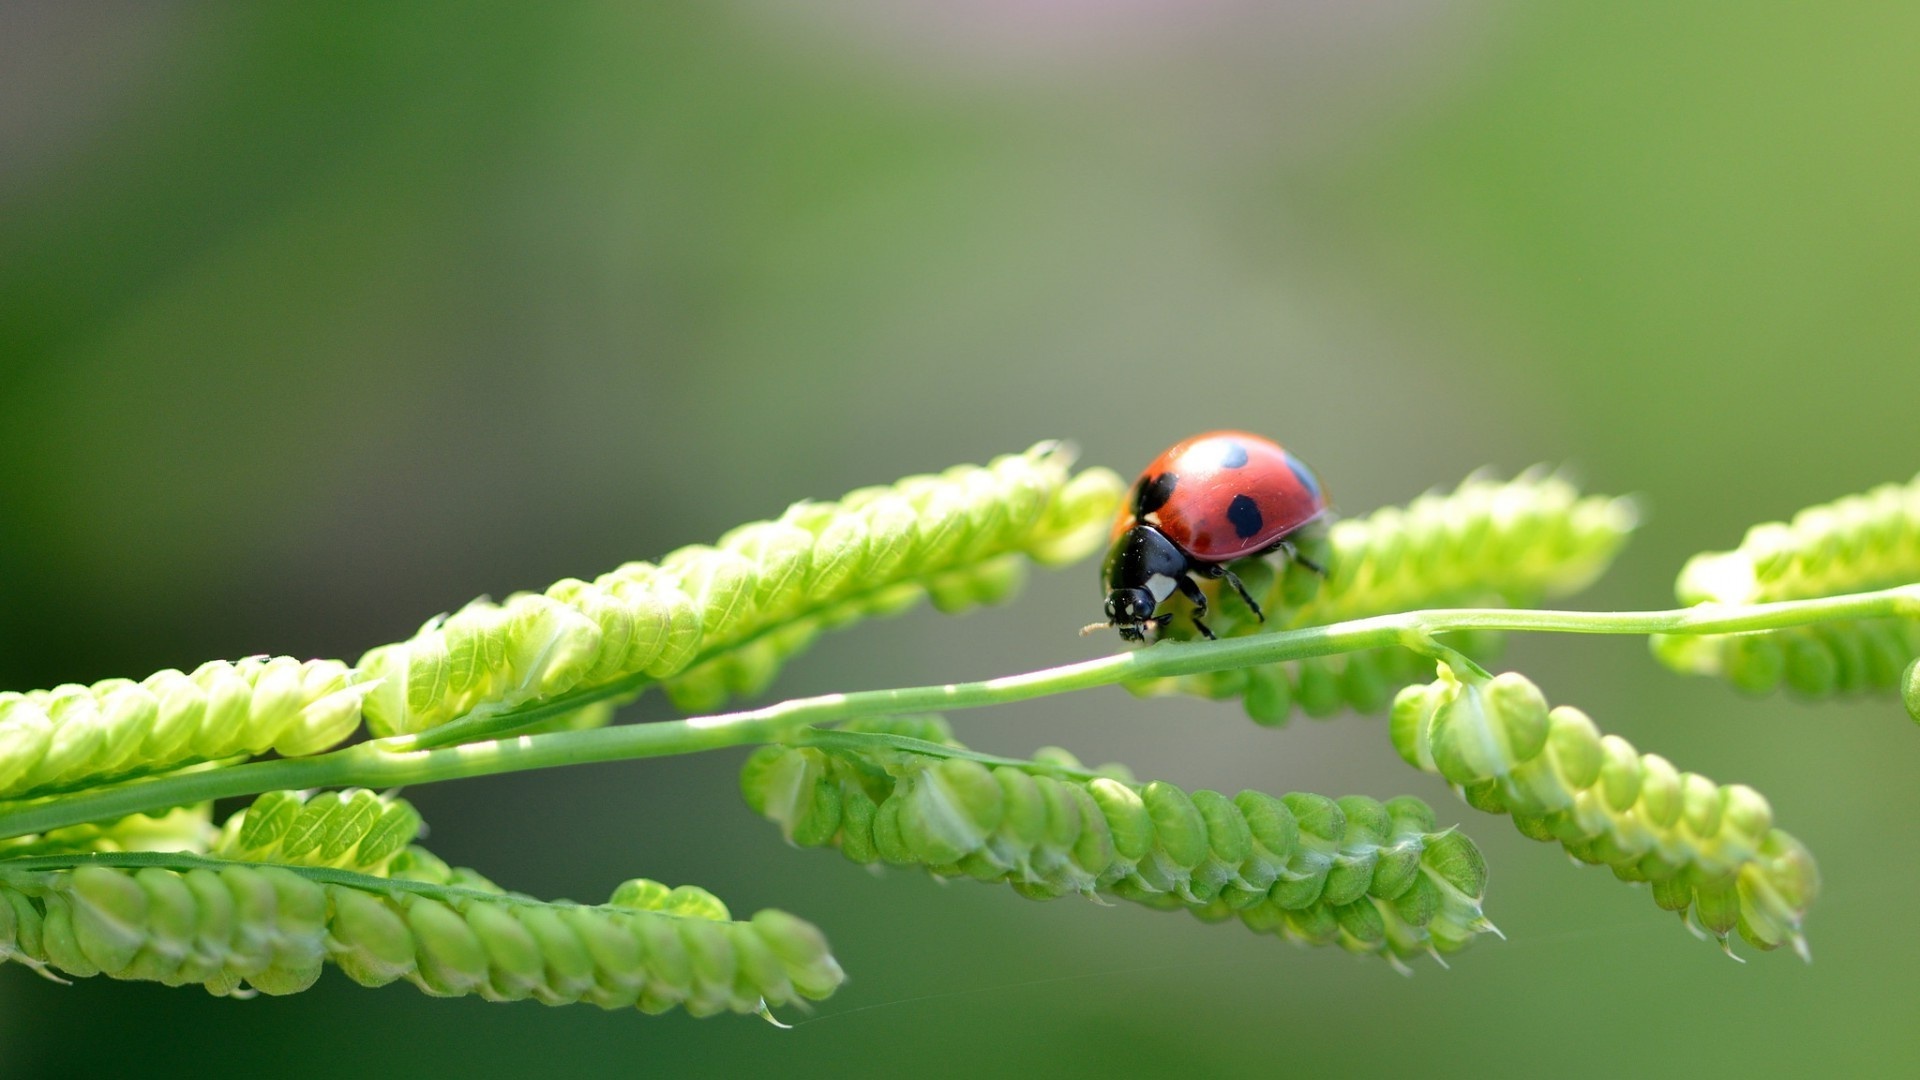 Ladybugs in nature, Plants and insects, Nature's tiny wonders, Wallpapers worth buzzing about, 1920x1080 Full HD Desktop